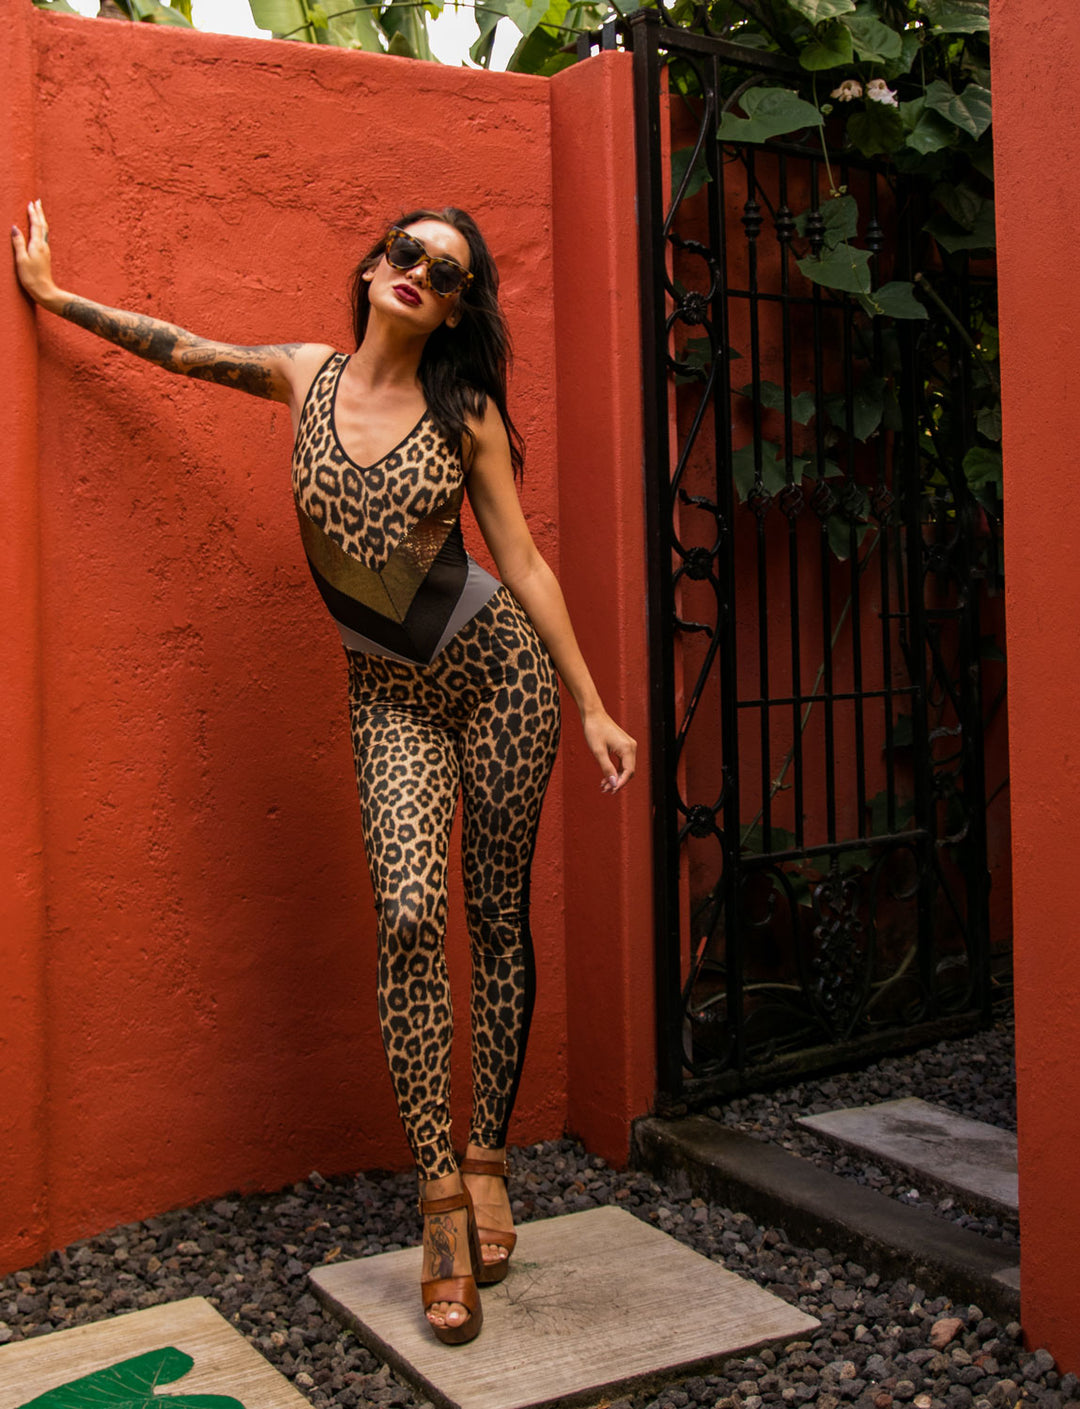 Lady wearing Leopard print panelled catsuit